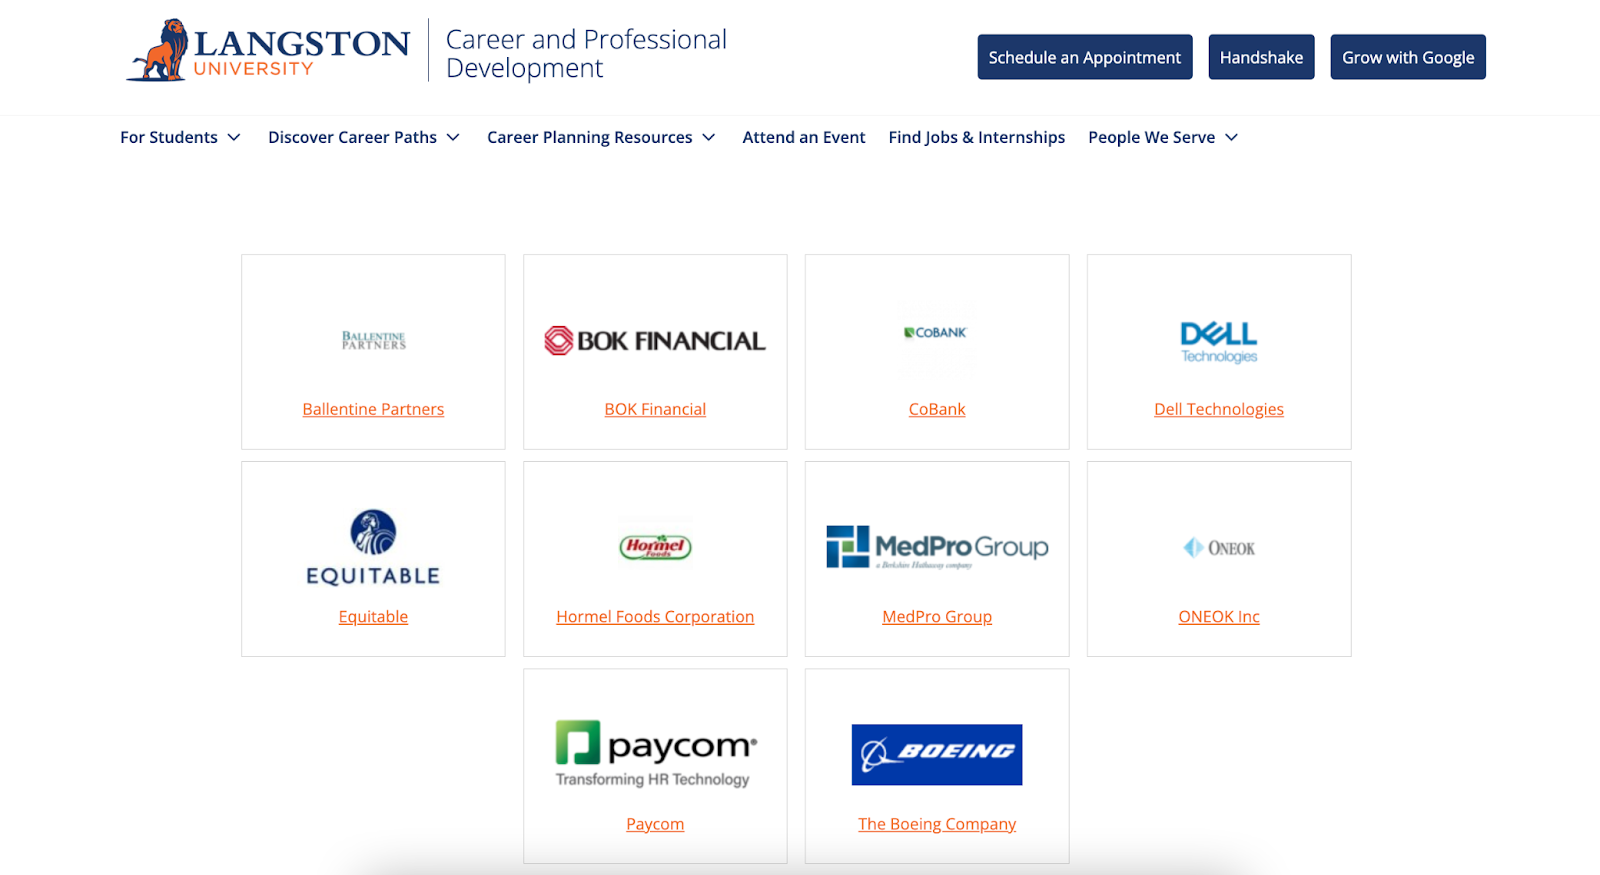 A screenshot of the Langton University virtual career center sponsors page, with sponsors including Ballentine Partners, BOK Financial, CoBank, Dell Technologies, Equitable, Hormel Foods Corporation, MedPro Group, ONEOK Inc, Paycom, and The Boeing Company.